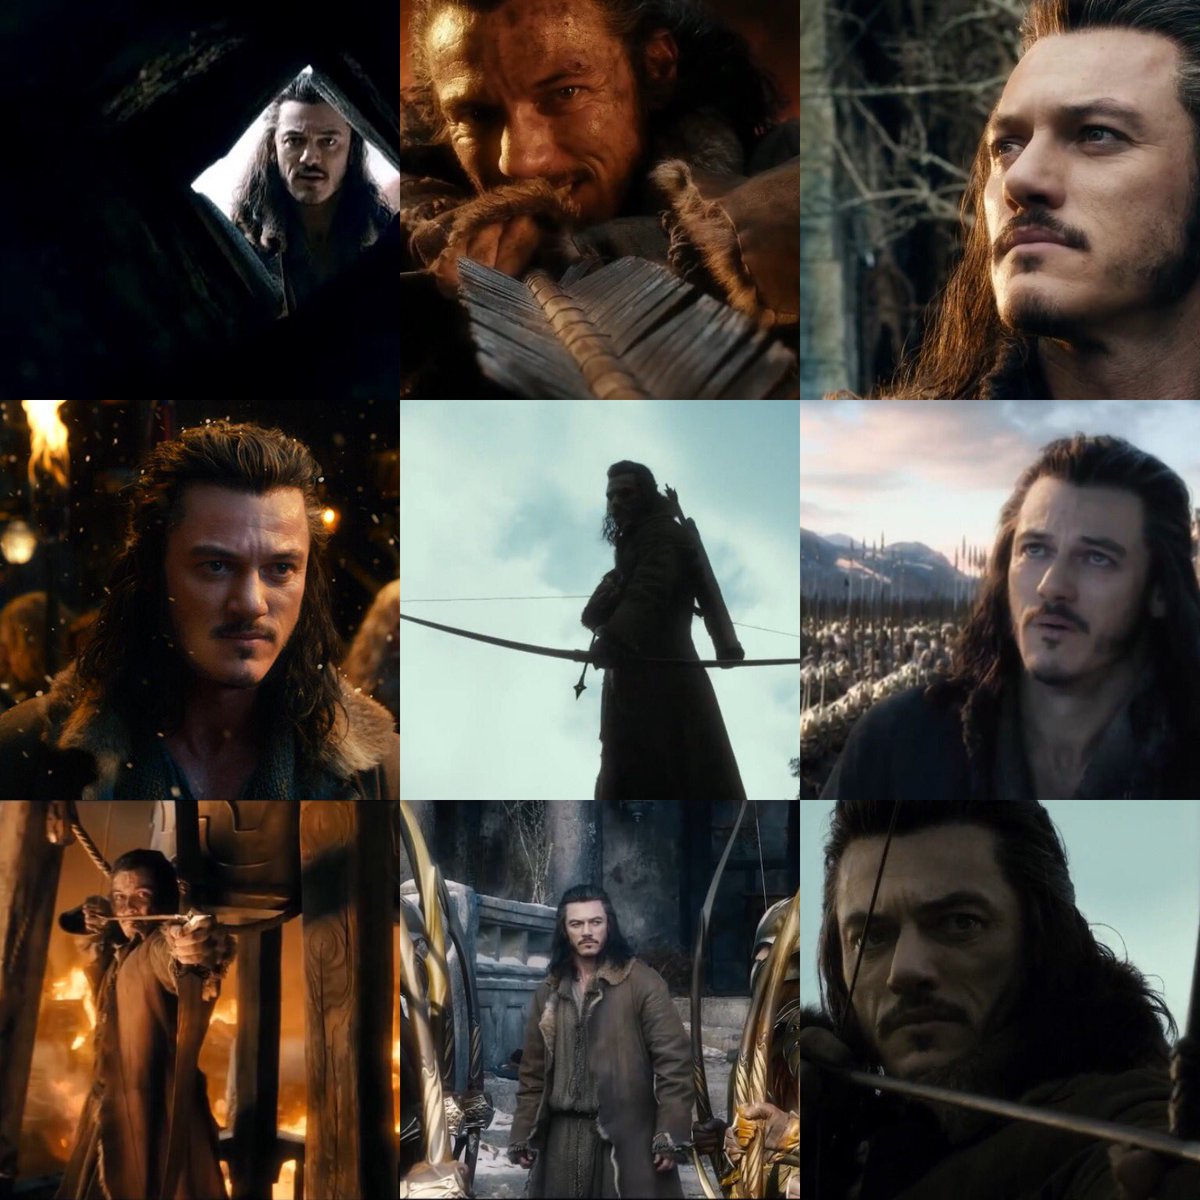 The new King of Dale, the Dragon slayer, Bard the Bowman